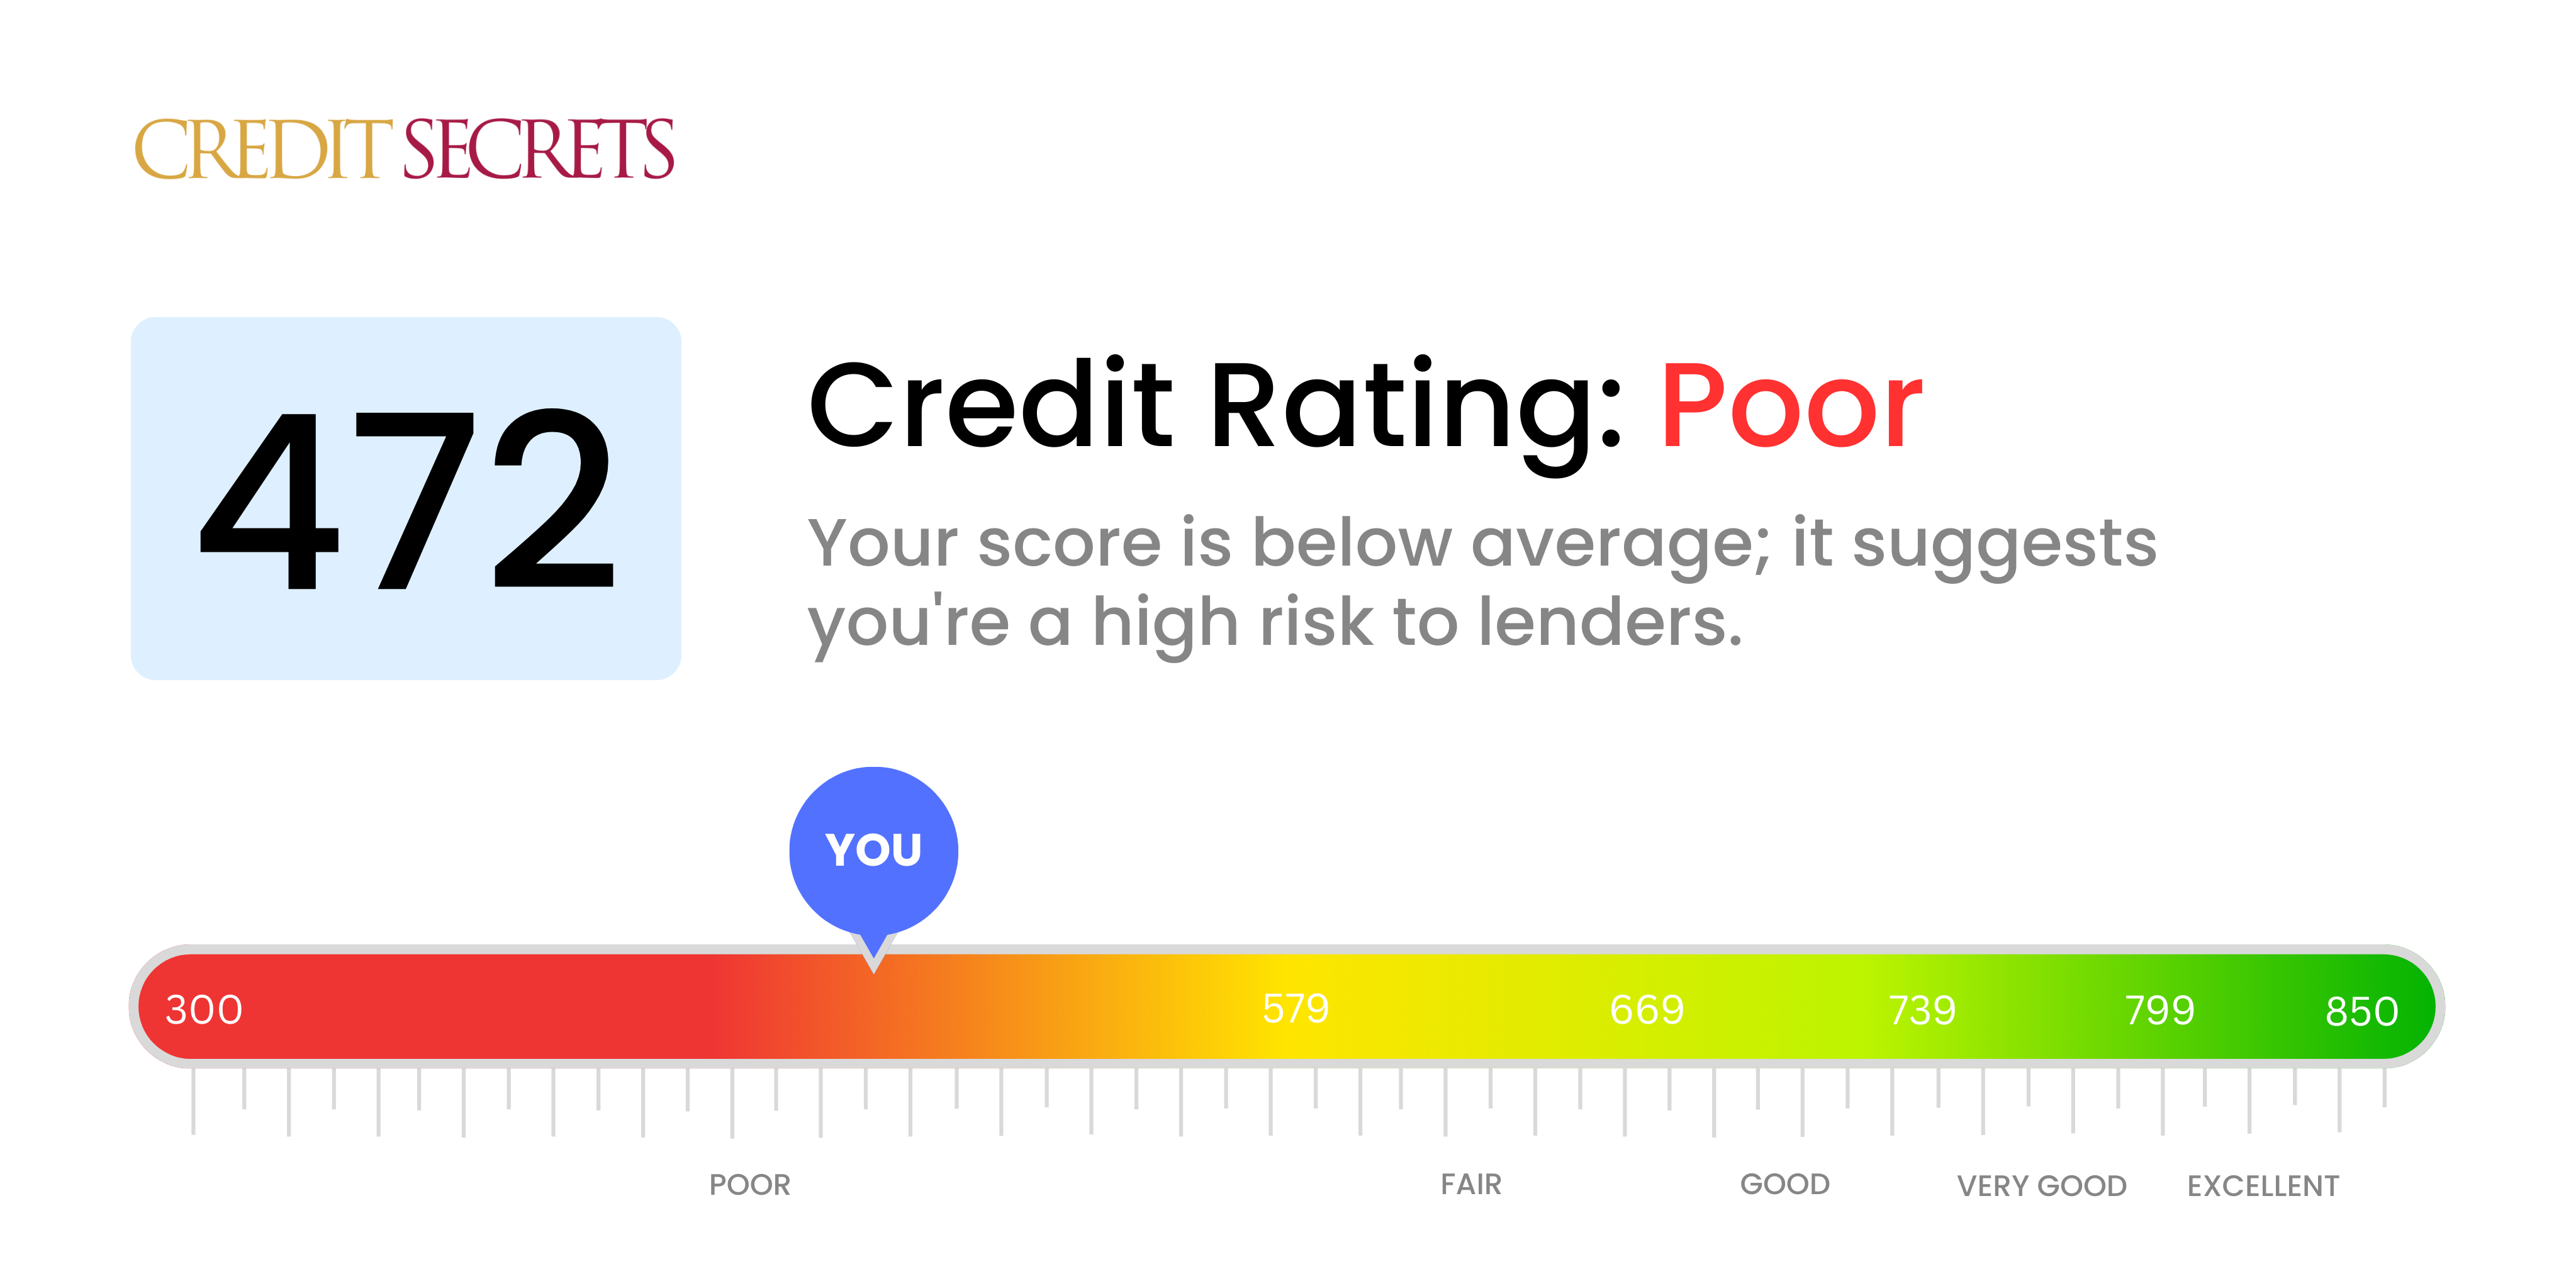 Is 472 a good credit score?